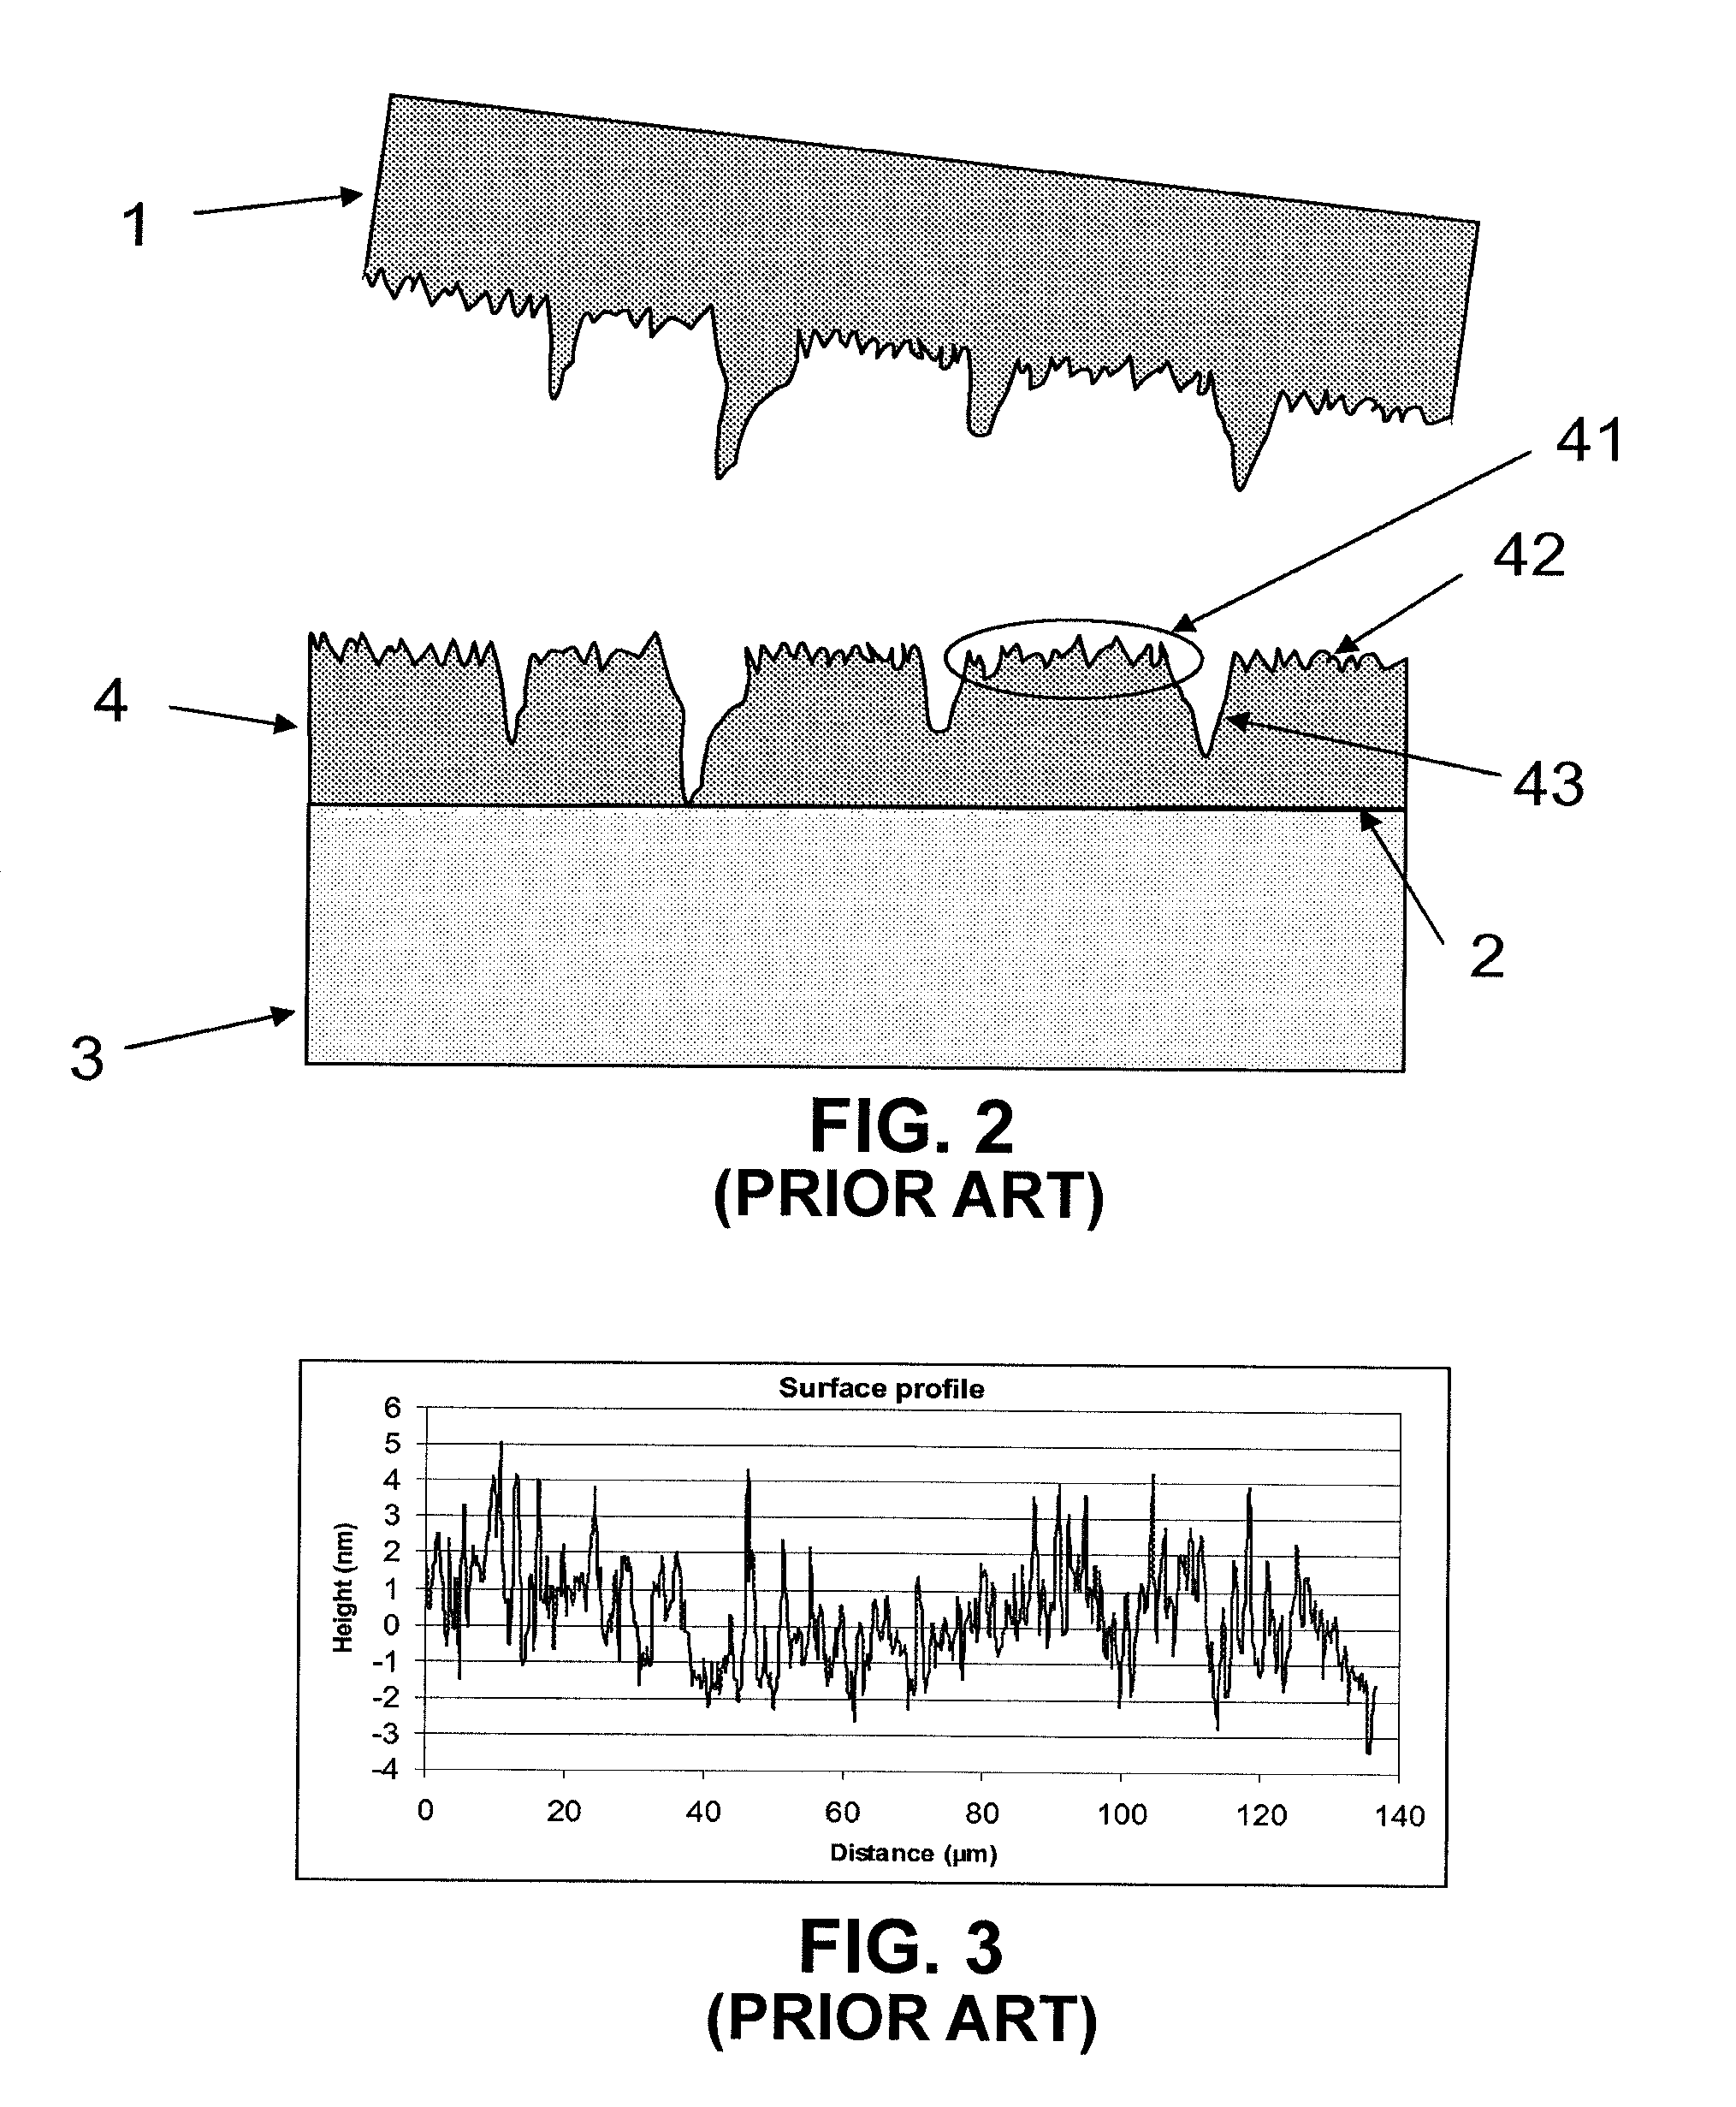 Method for reducing irregularities at the surface of a layer transferred from a source substrate to a glass-based support substrate